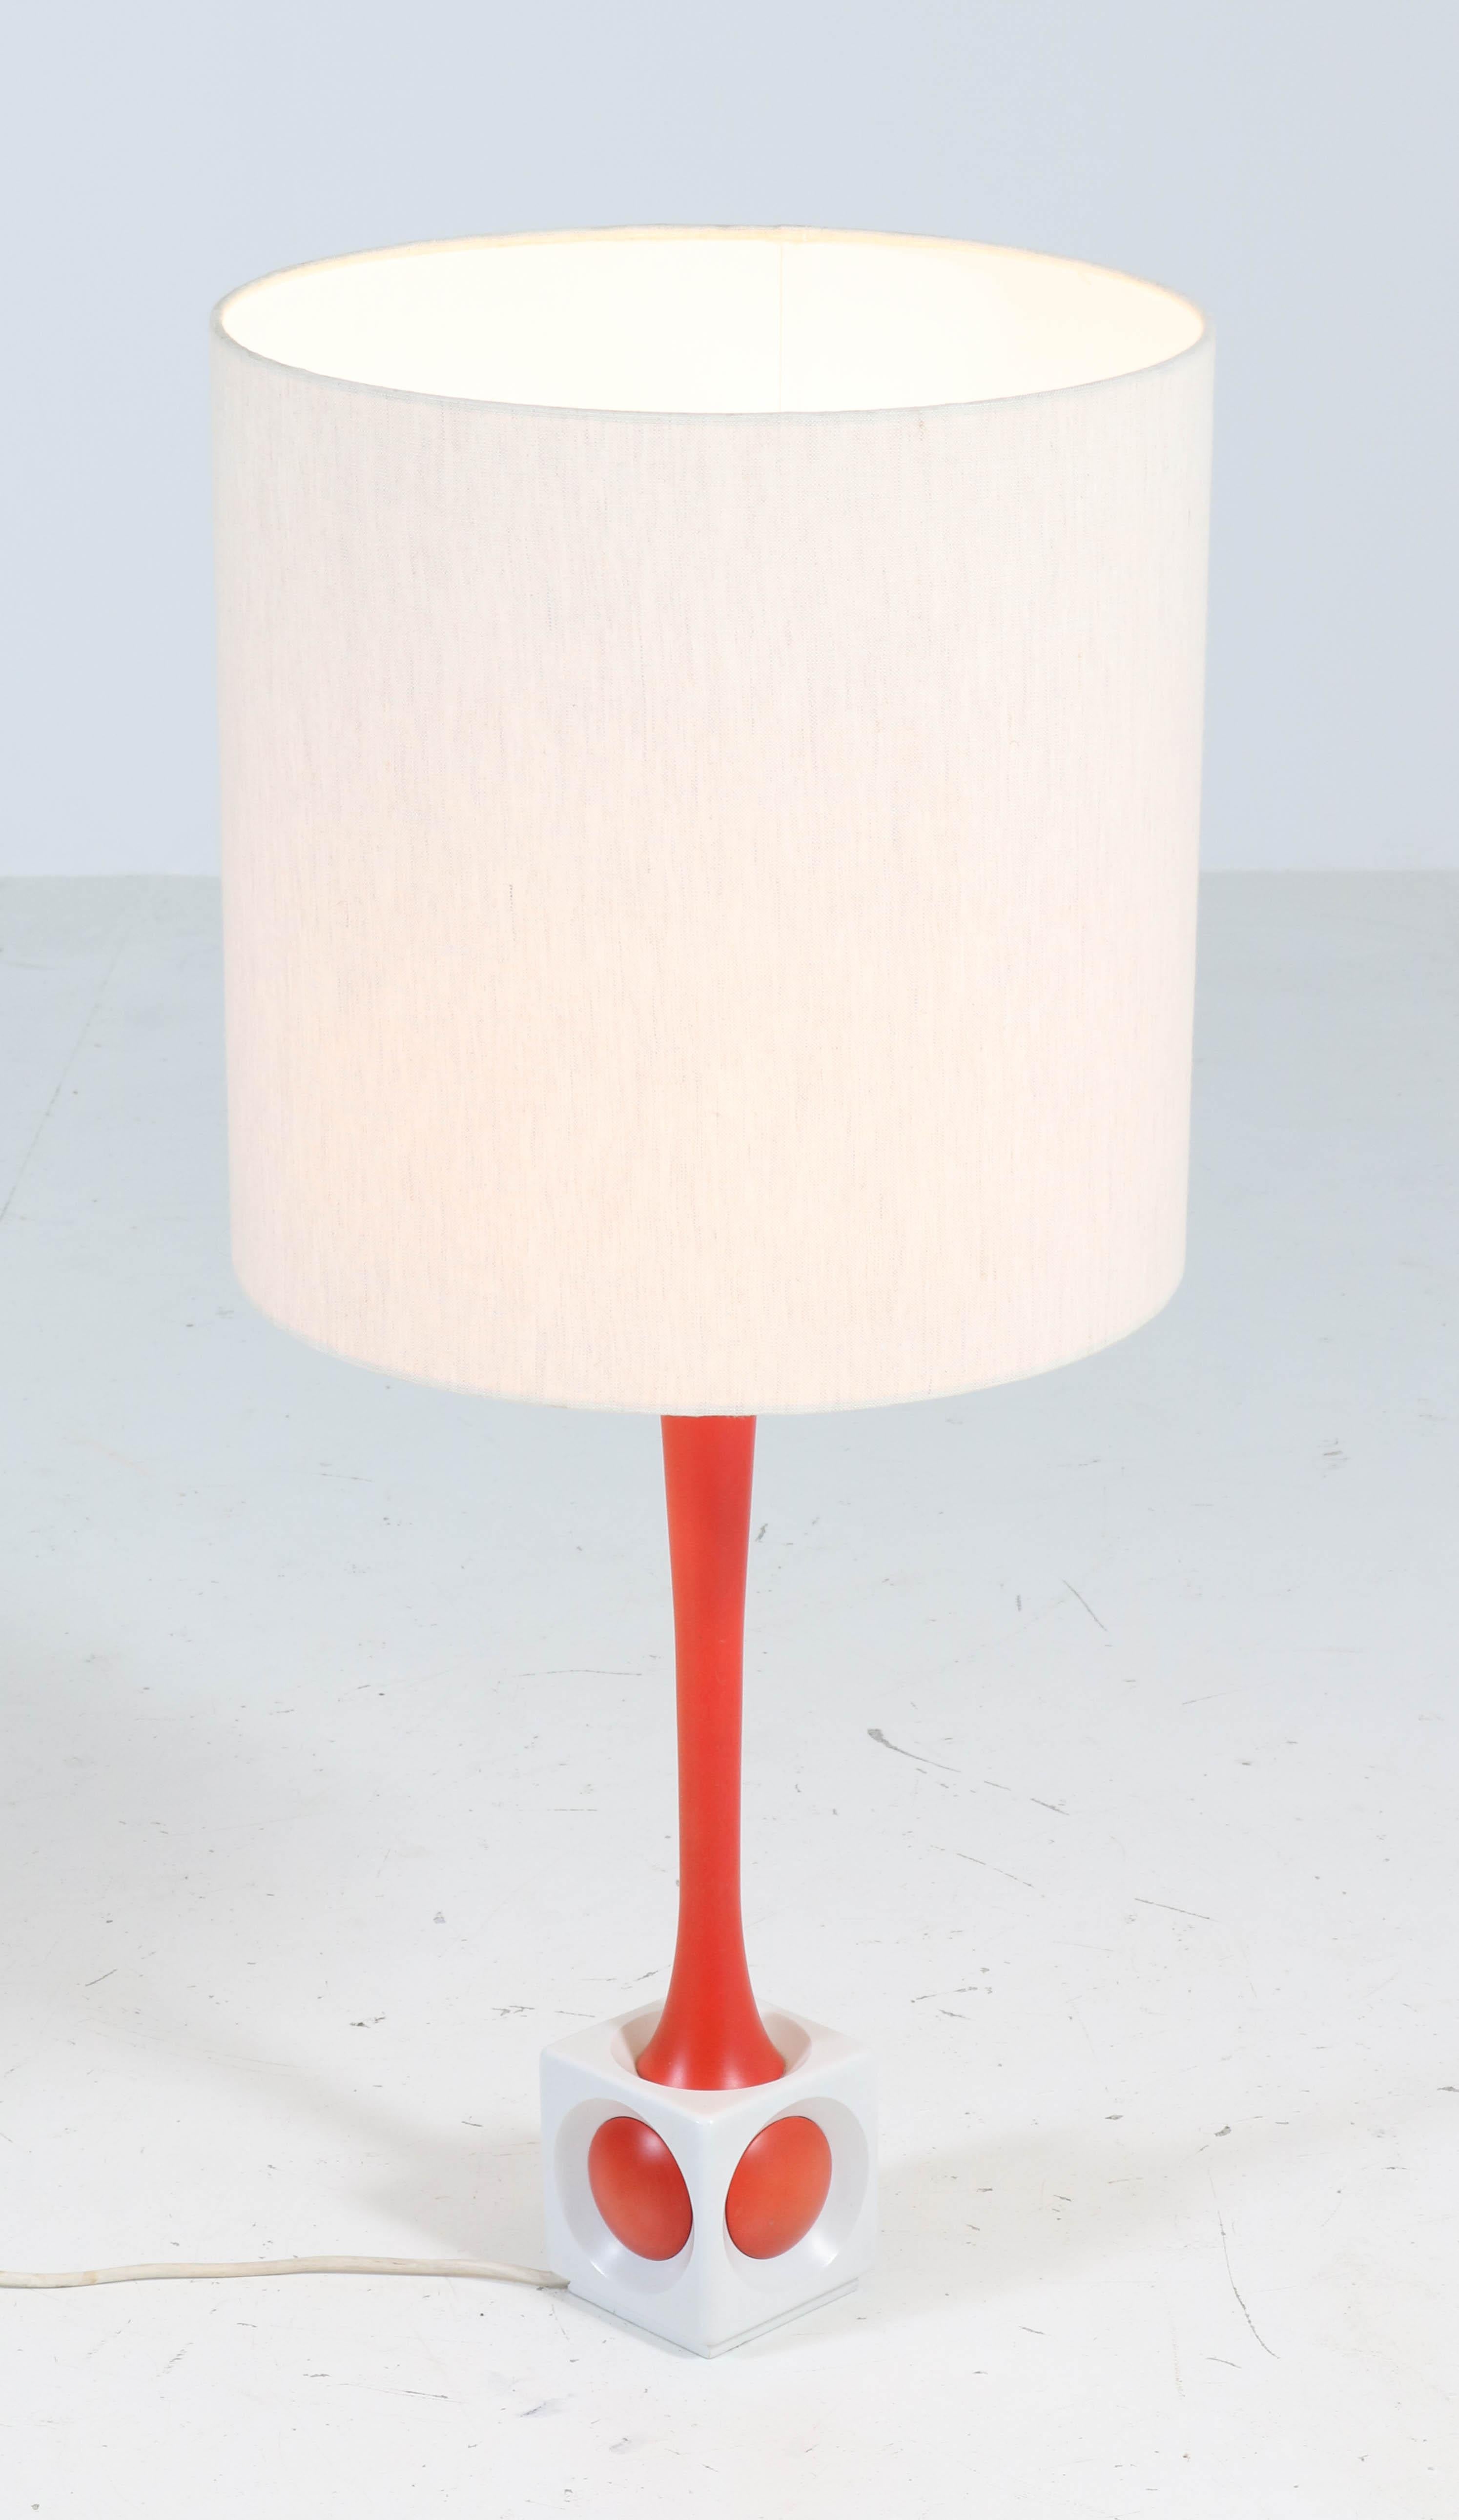 Wonderful Mid-Century Modern table lamp.
Design by Temde Leuchten.
Type: 53
Striking German design from the 1960s.
White and red lacquered wooden base with original cream fabric shade.
Marked with original manufacturers label.
In very good